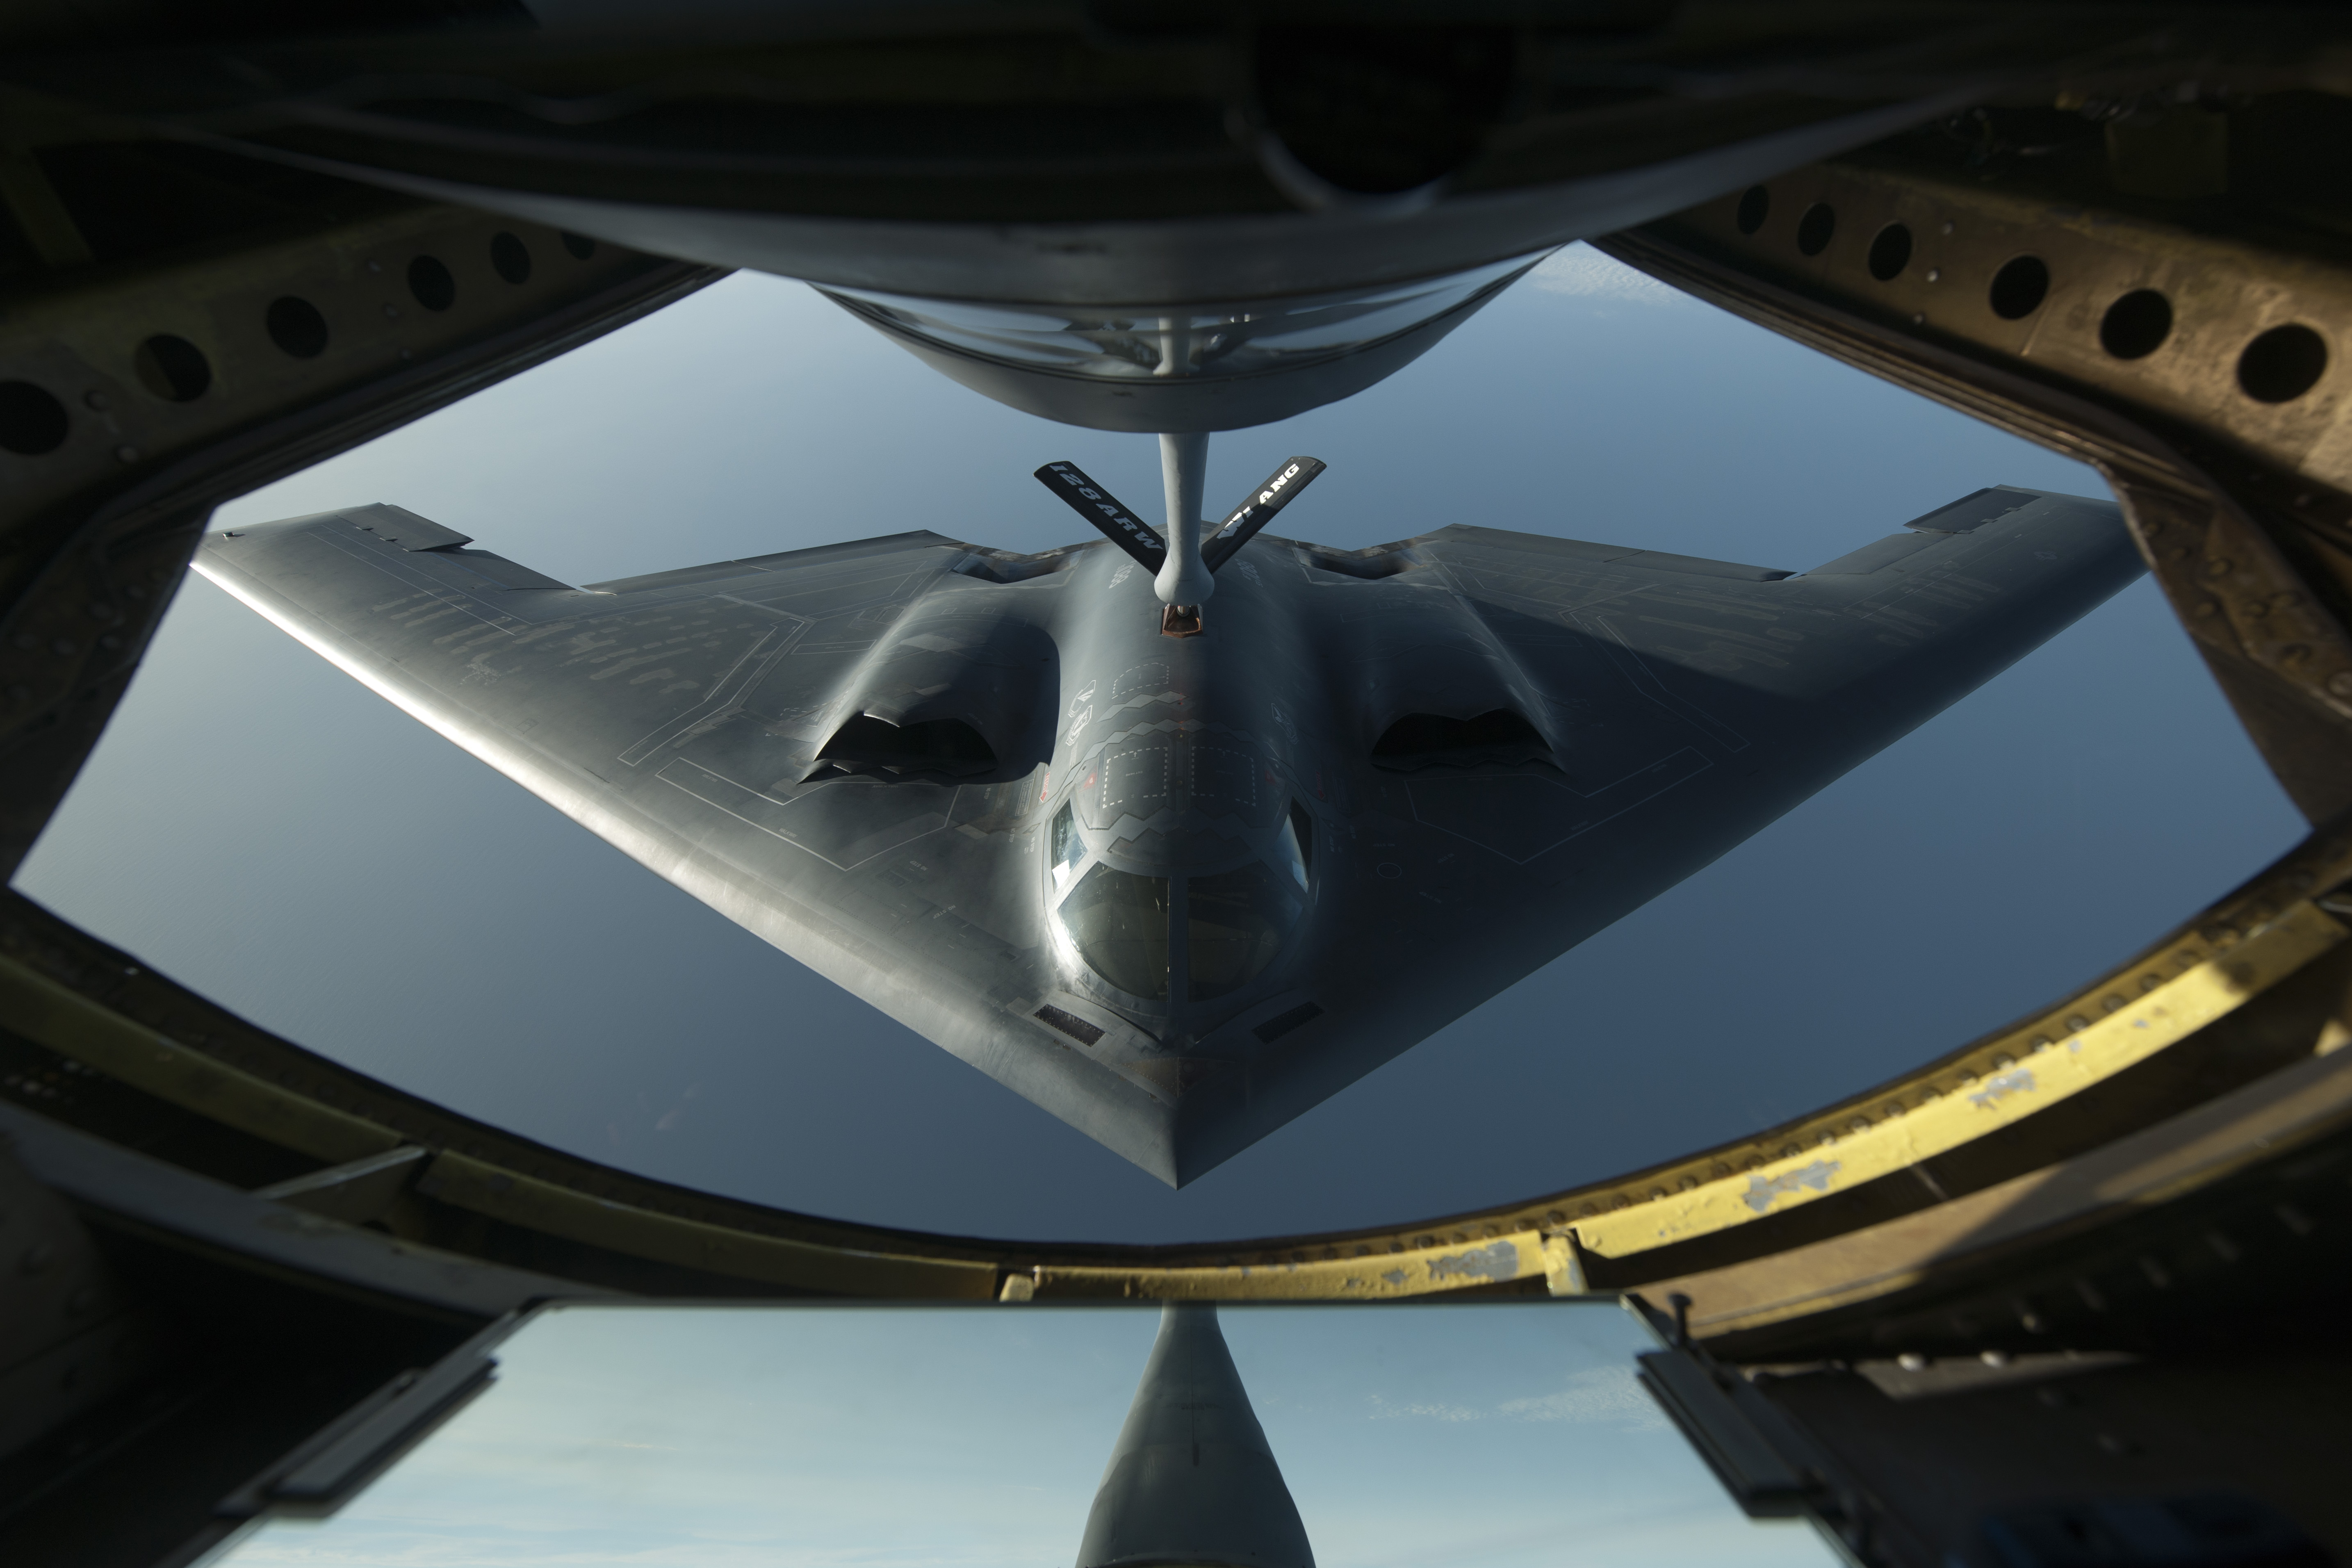 General 5736x3824 airplane military aircraft US Air Force Northrop Grumman B-2 Spirit Boeing KC-135 Stratotanker military aircraft Boeing Northrop Grumman American aircraft flying frontal view vehicle sky military vehicle